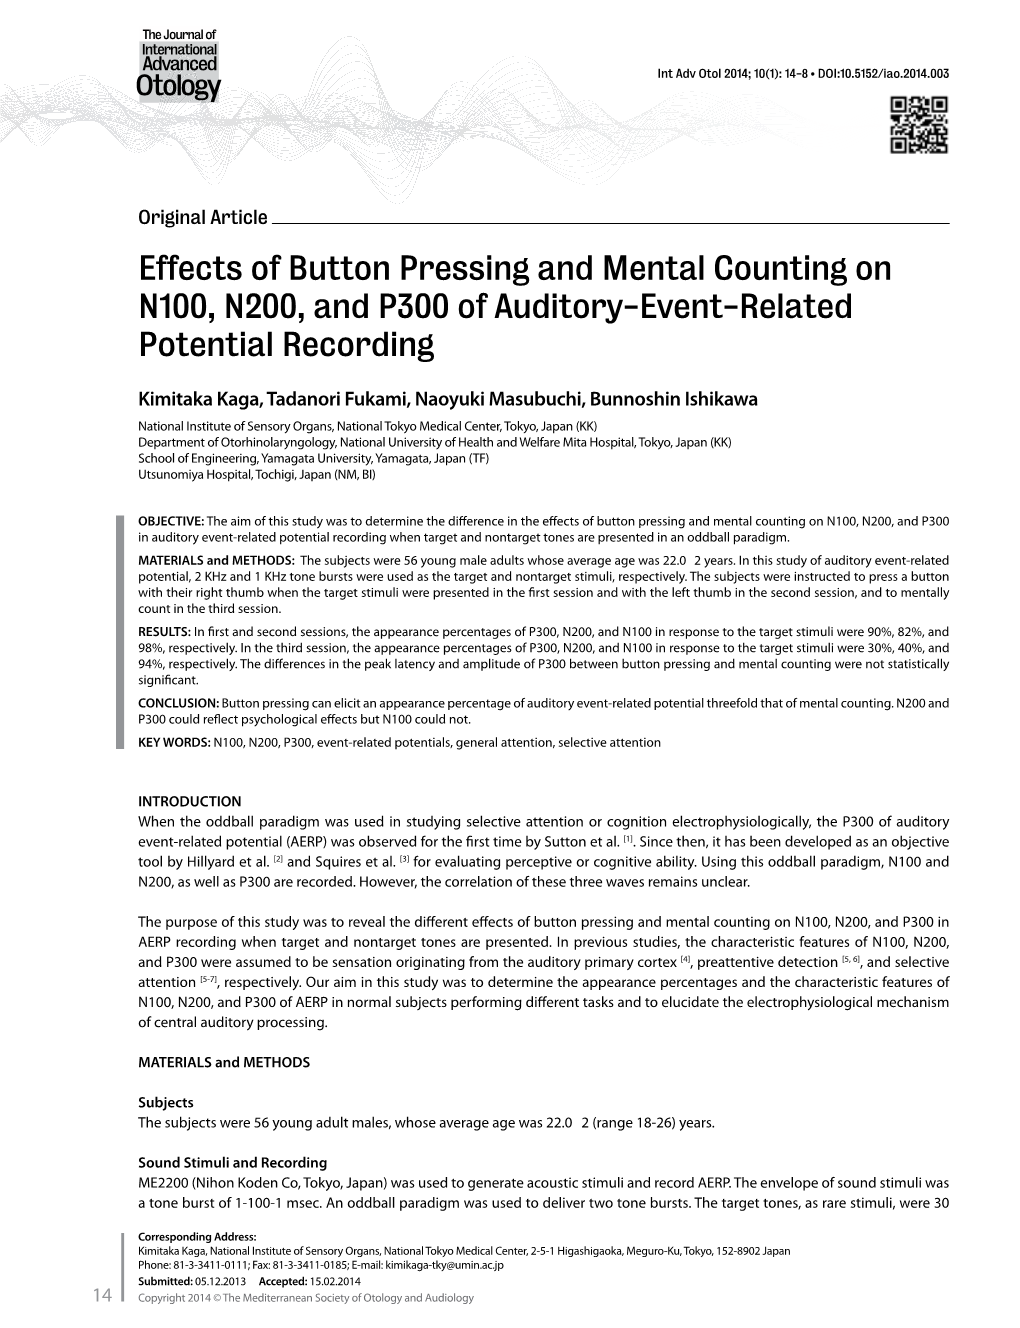 Effects of Button Pressing and Mental Counting on N100, N200, and P300 of Auditory-Event-Related Potential Recording